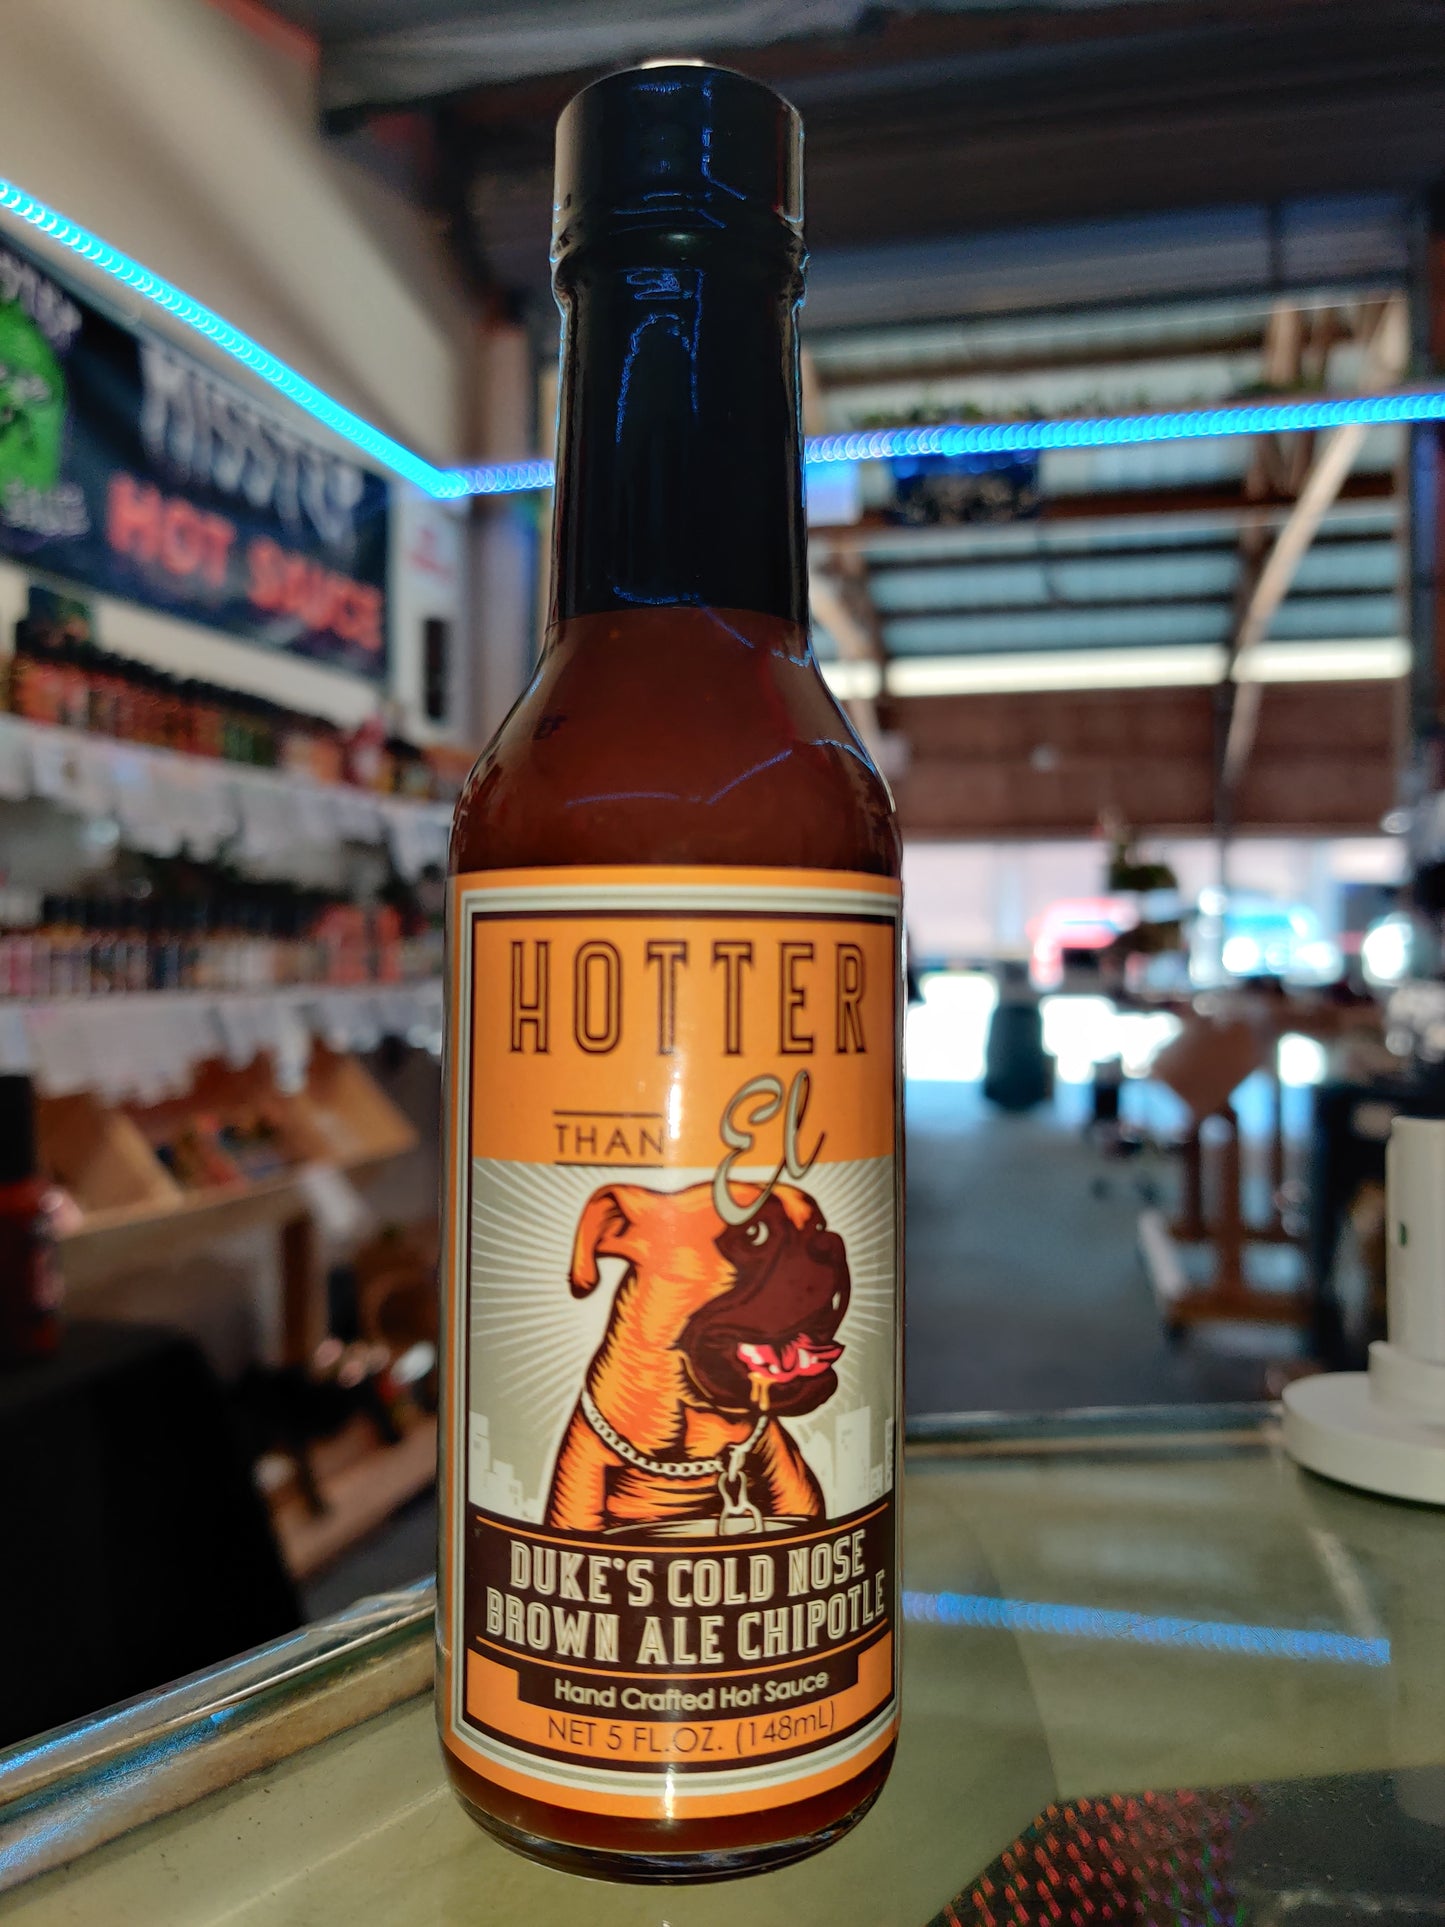 Hotter Than El - Dukes Cold Nose Brown Ale Chipotle